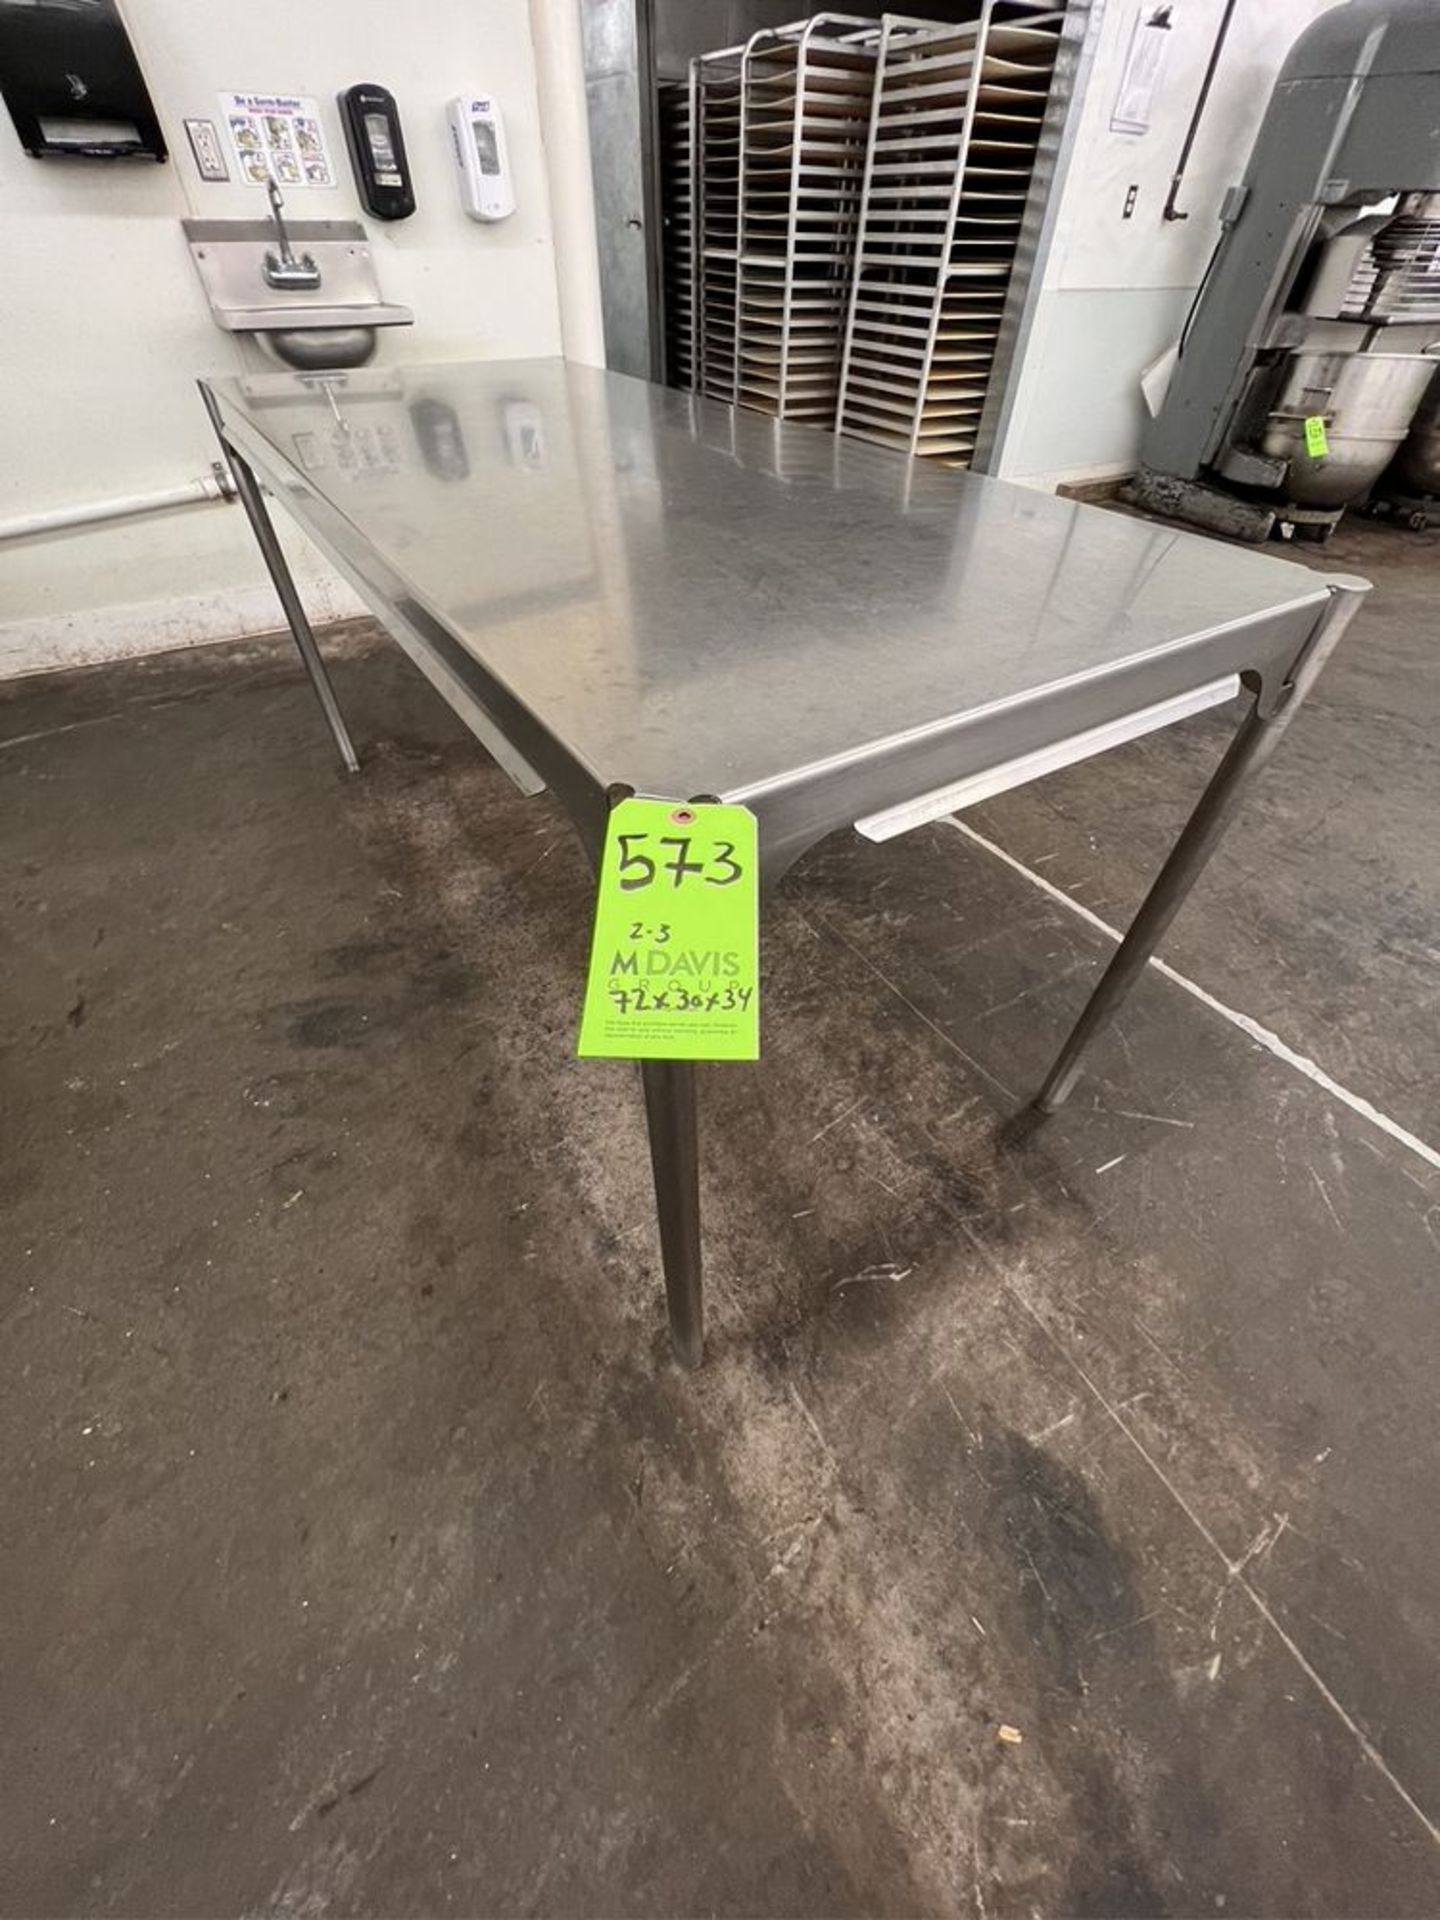 (3) S/S TABLES, (1) WITH EDLUND CAN OPENER,  APPROX. DIMS 72 X 30 X 34, 72 X 30 X 34, 72 X 30 X 32 - Image 4 of 5